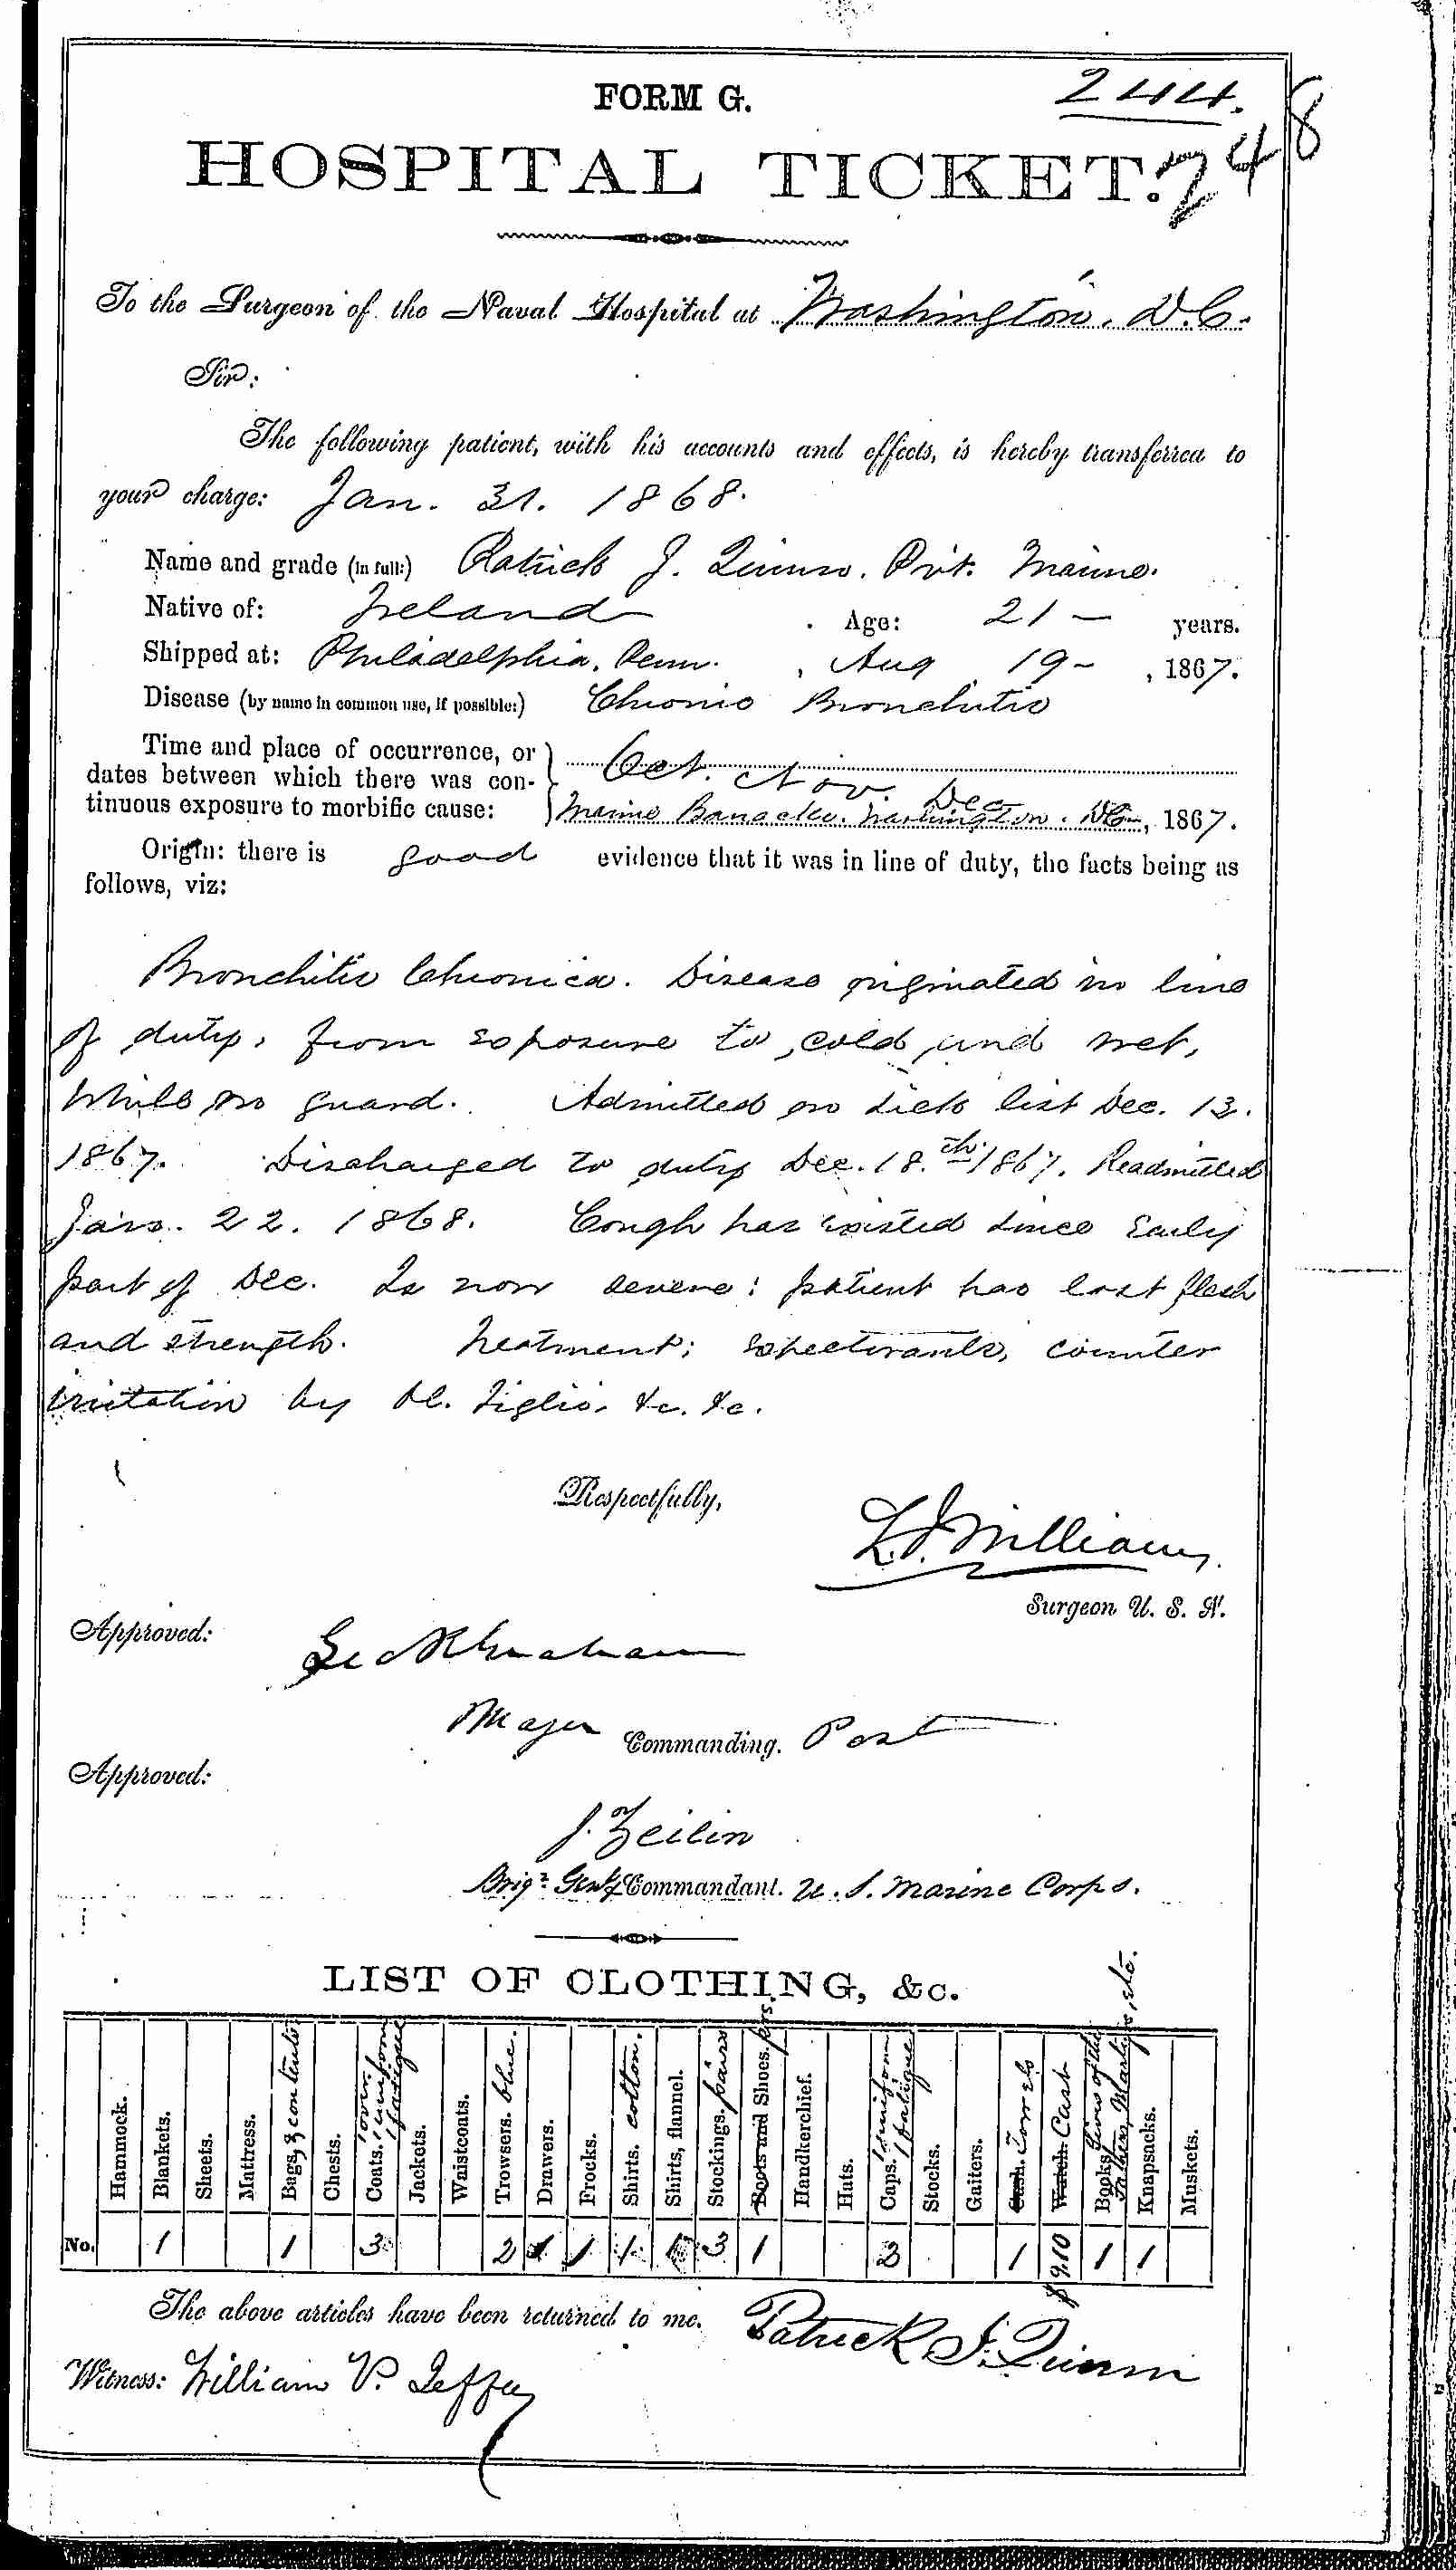 Entry for Patrick J. Quinn (page 1 of 2) in the log Hospital Tickets and Case Papers - Naval Hospital - Washington, D.C. - 1866-68